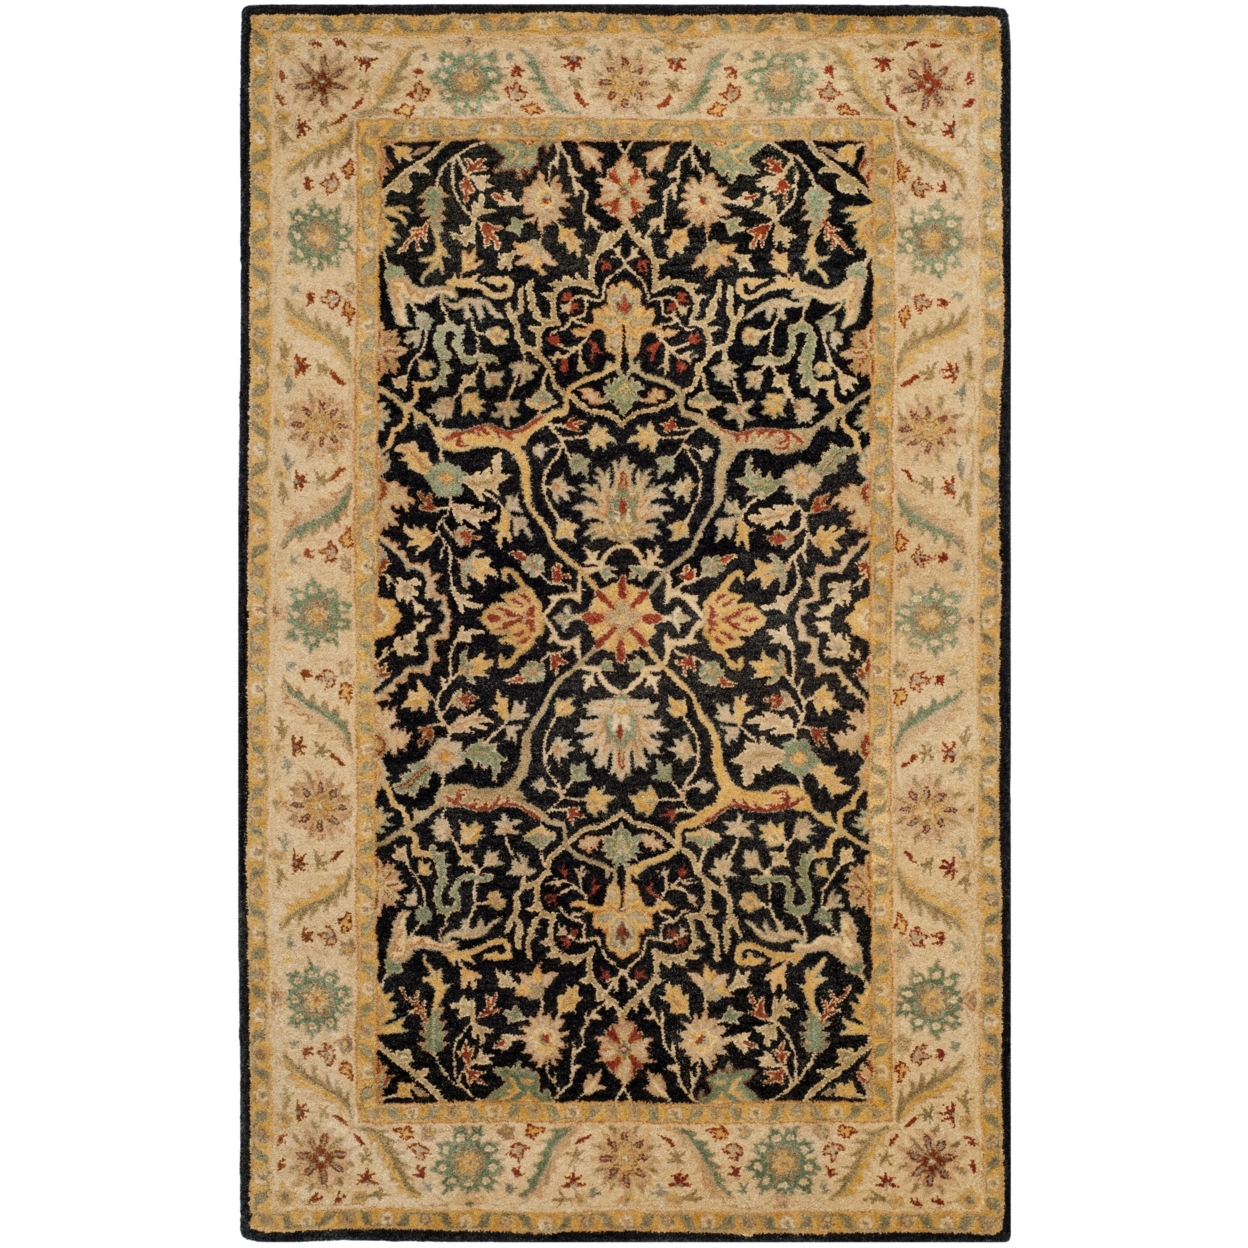 SAFAVIEH Antiquity Collection AT14B Handmade Black Rug - 7' 6 X 9' 6 Oval